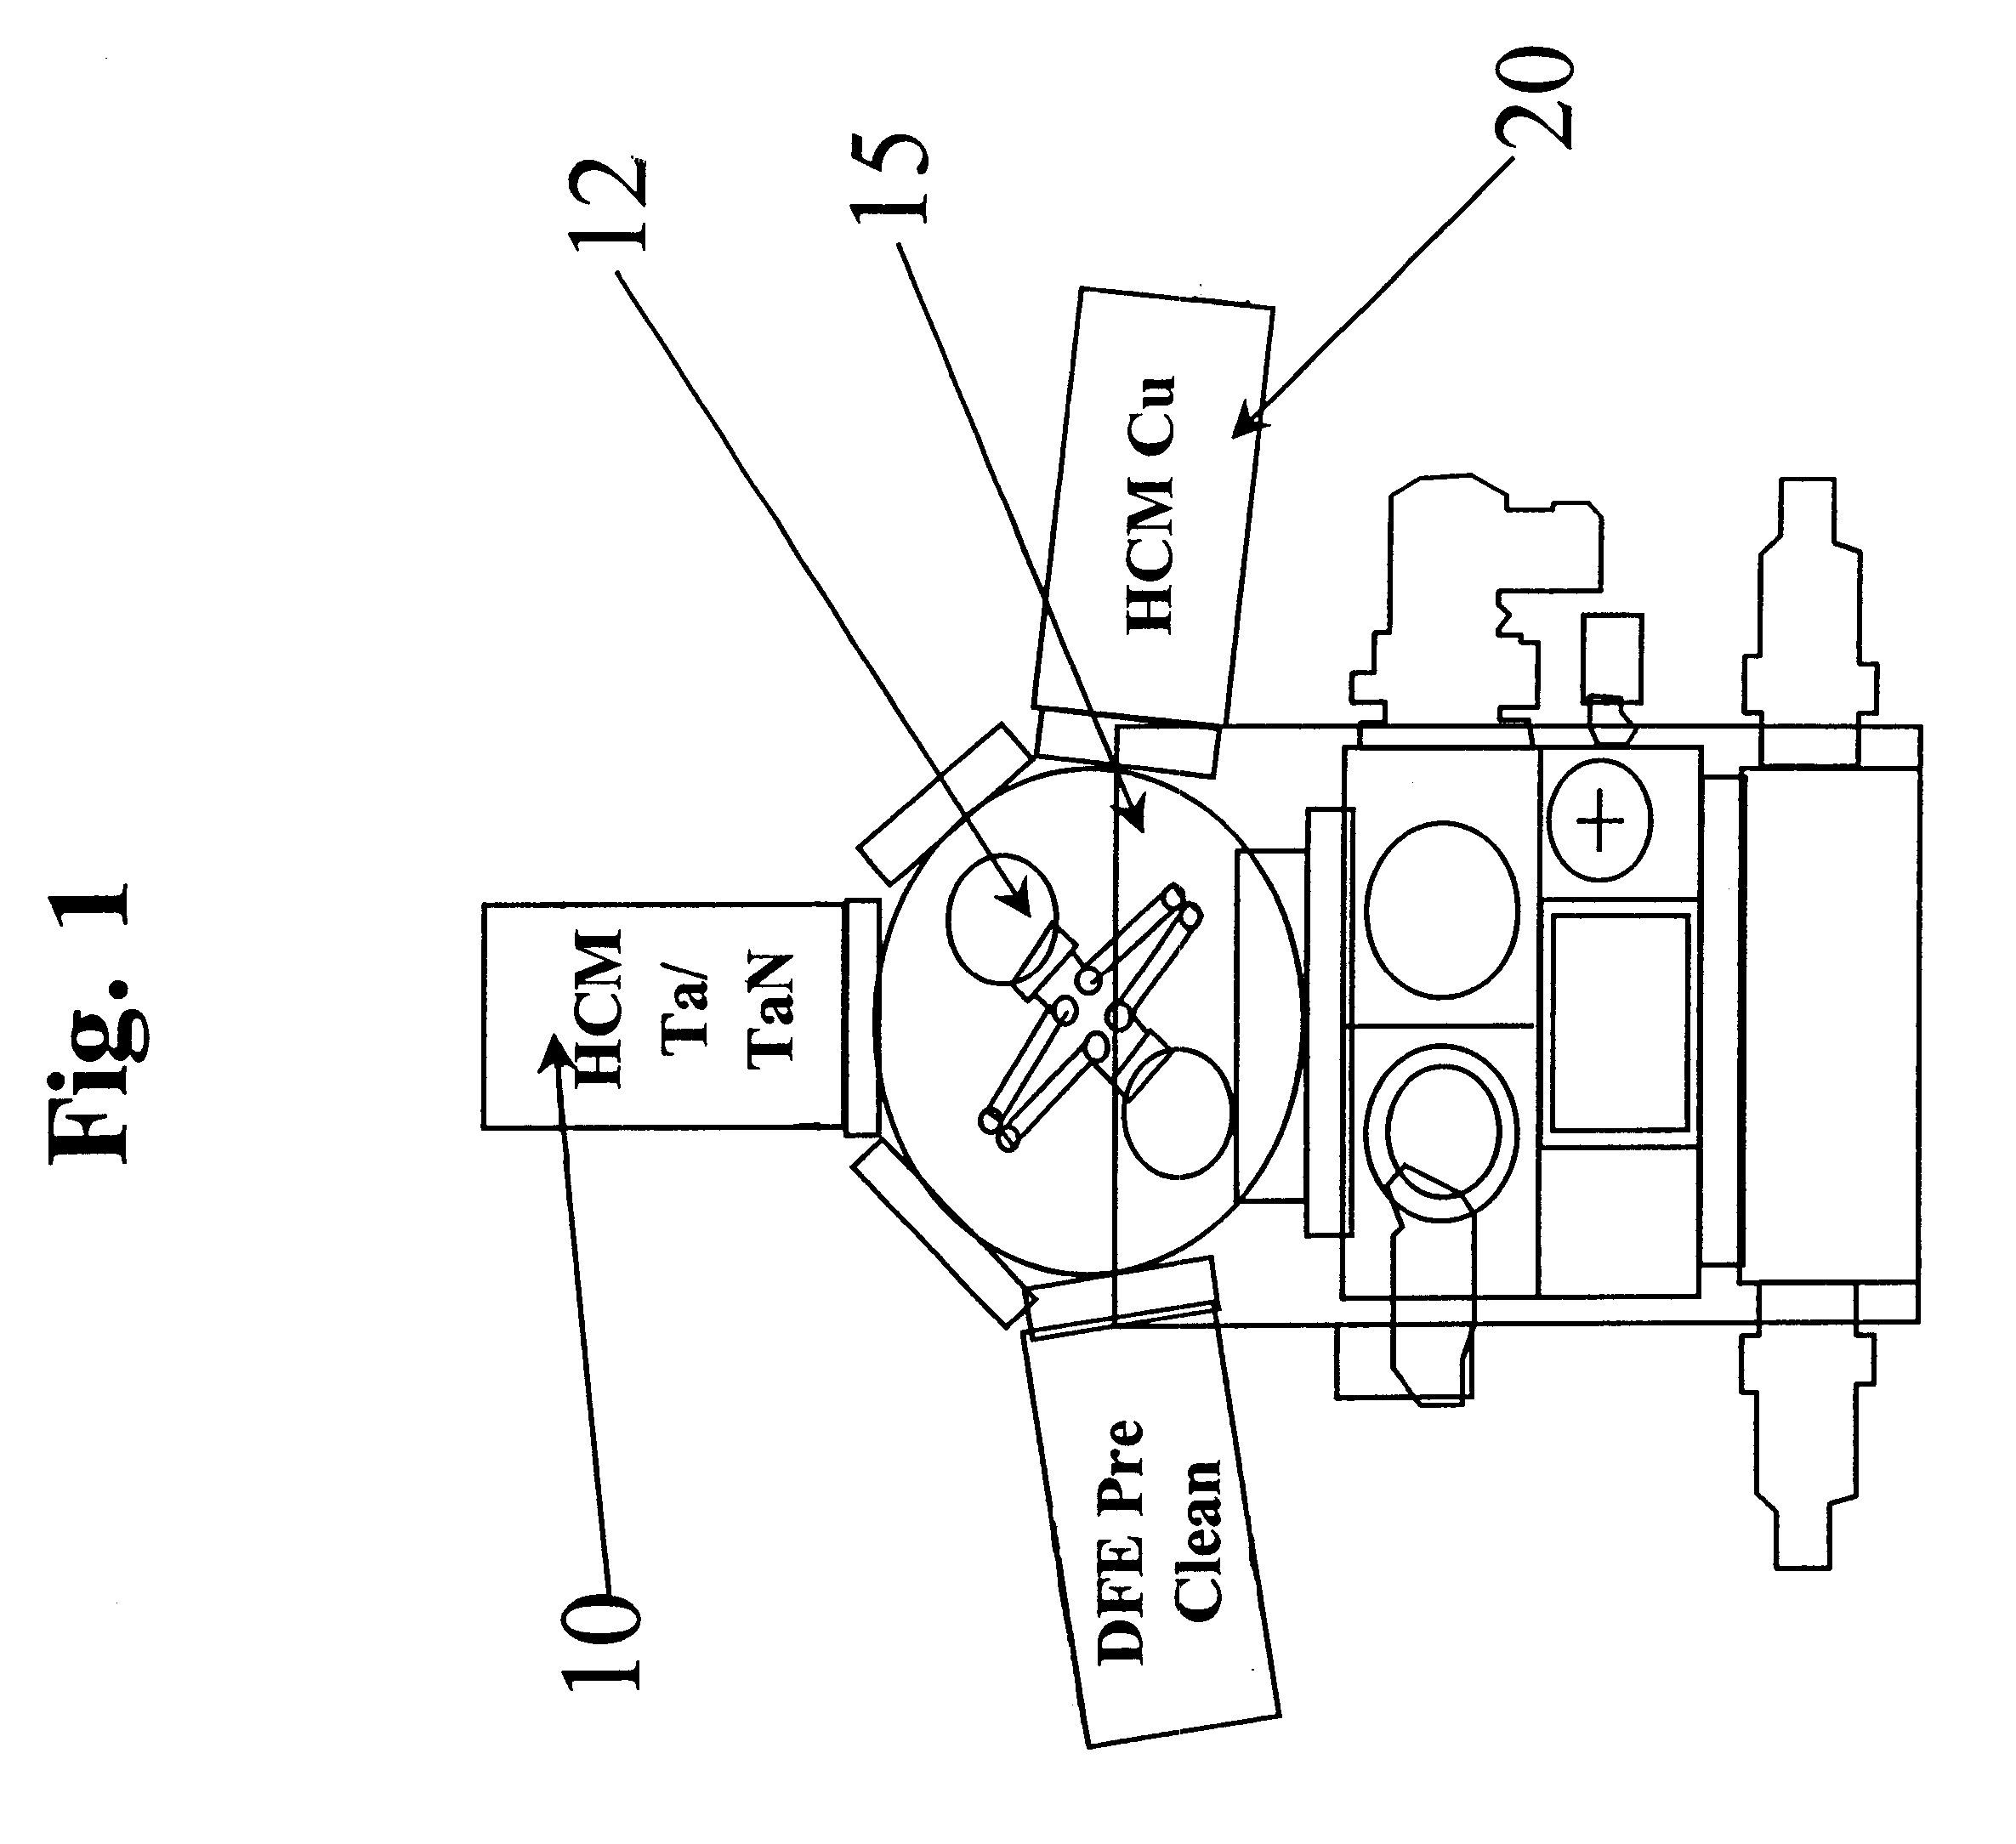 Apparatus and method for depositing superior Ta(N)/copper thin films for barrier and seed applications in semiconductor processing